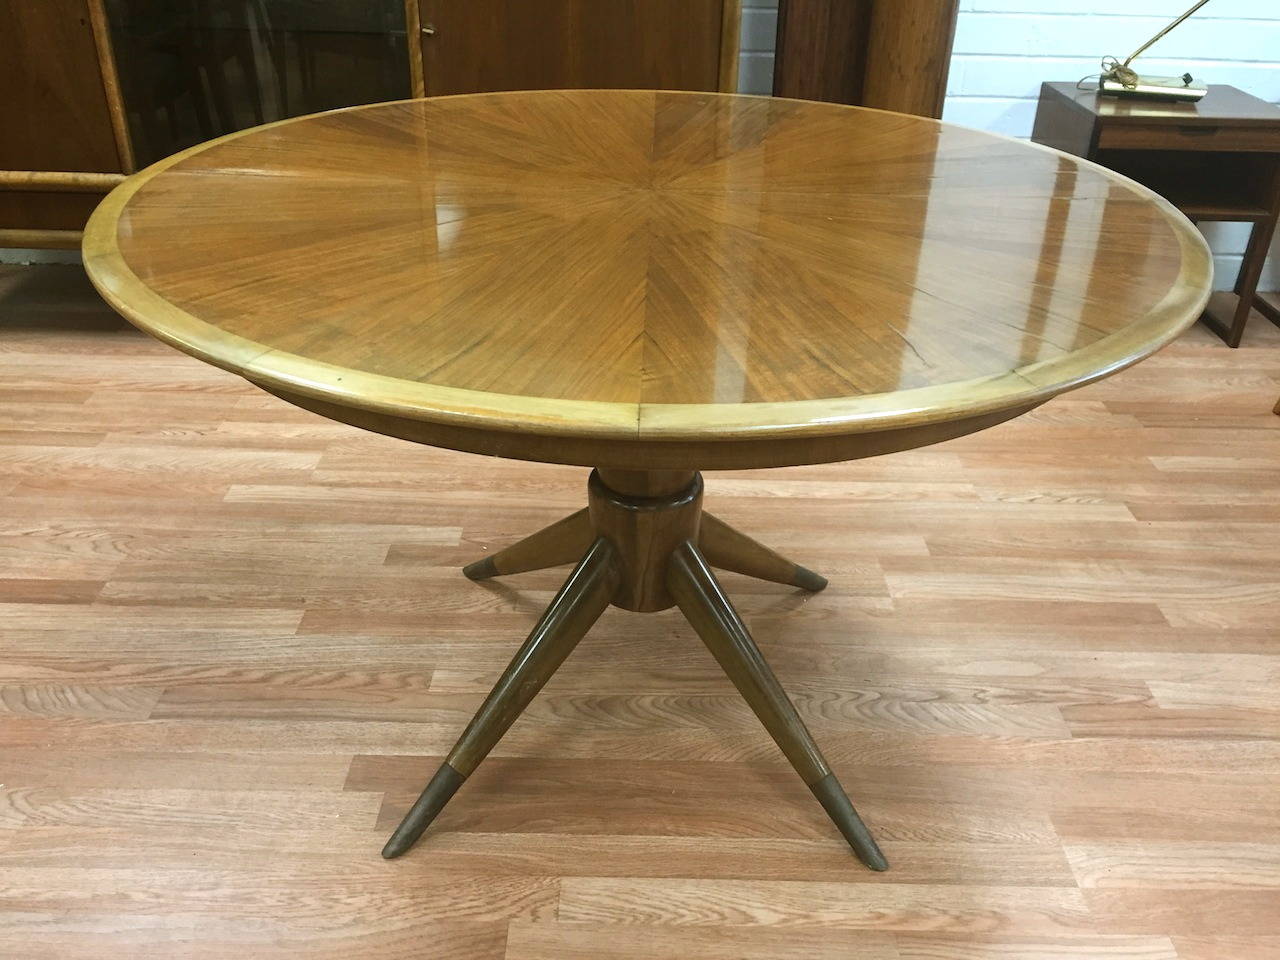 Sculptural dining table with three leaves by Melchiorre Bega. Sold in as found condition for restoration. Lacquer finish has cracking from age. Minor chips as well as a minor repair to base which is not very notable. Leaves each measure 18